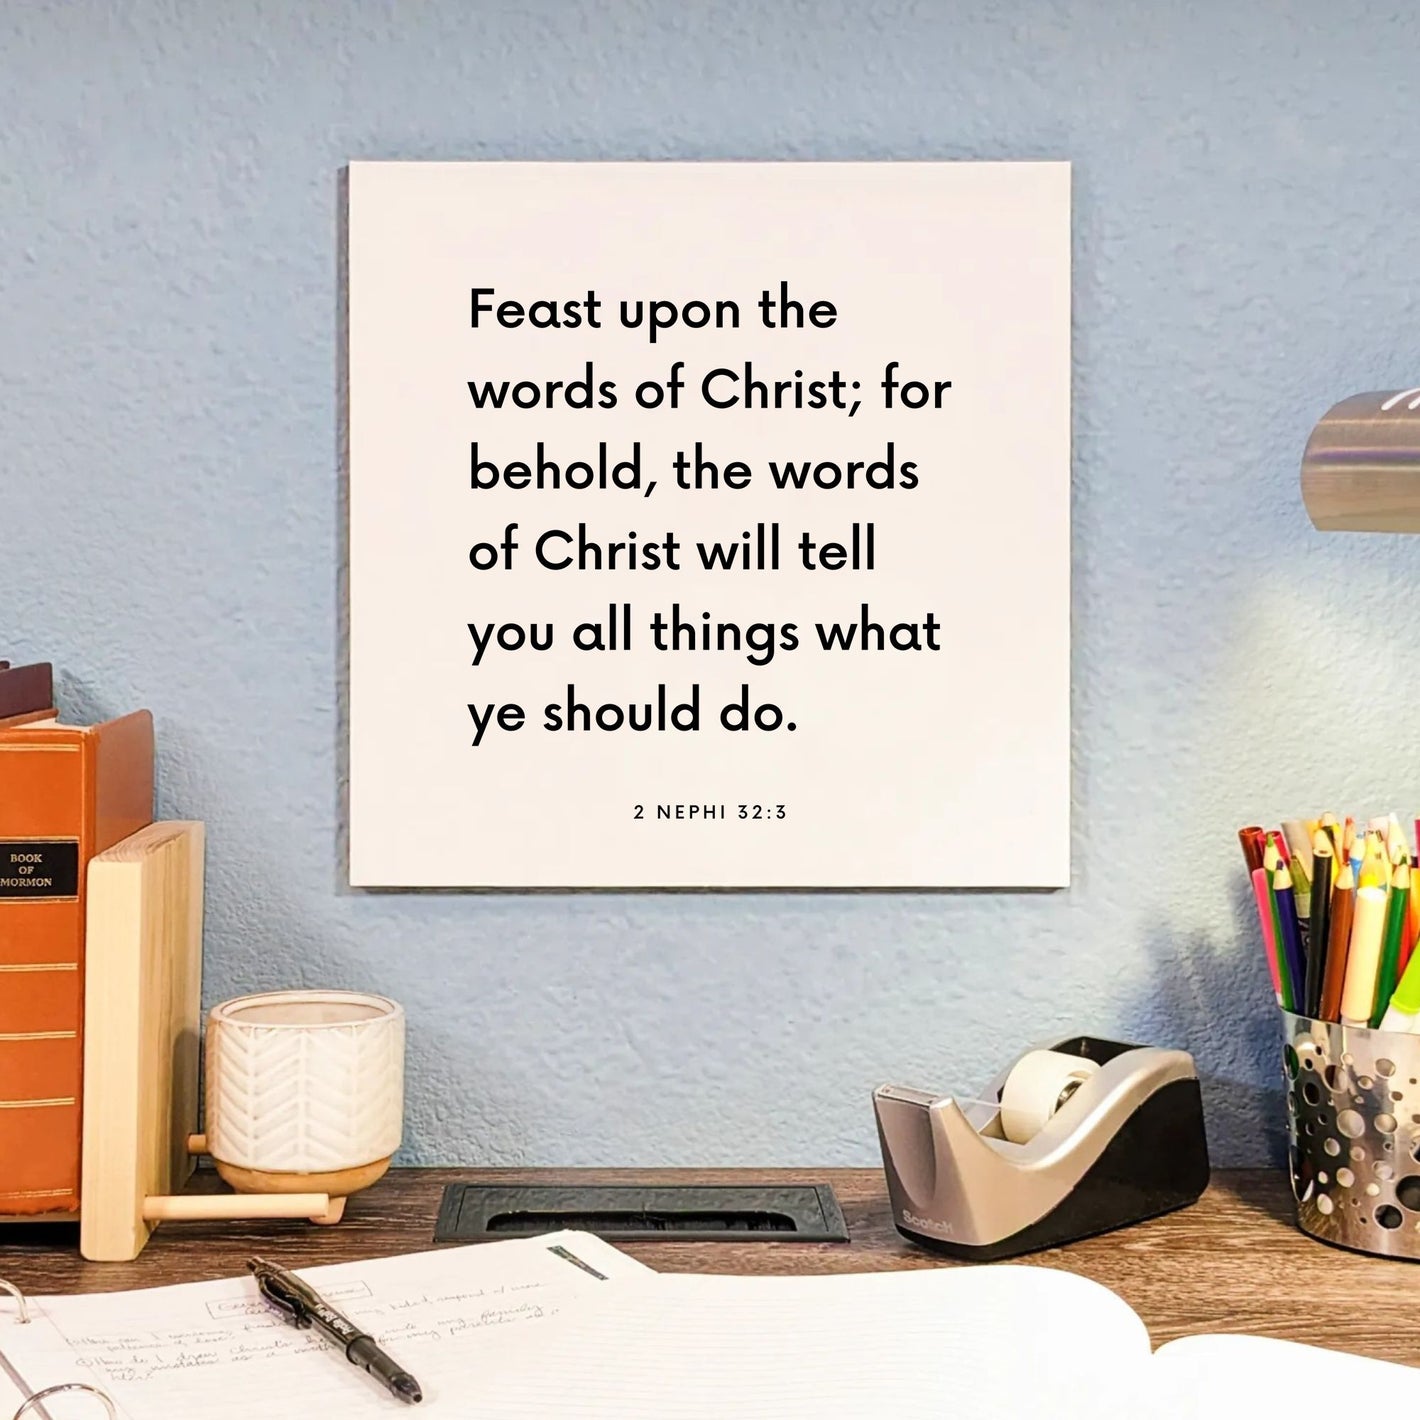 Desk mouting of the scripture tile for 2 Nephi 32:3 - "Feast upon the words of Christ"